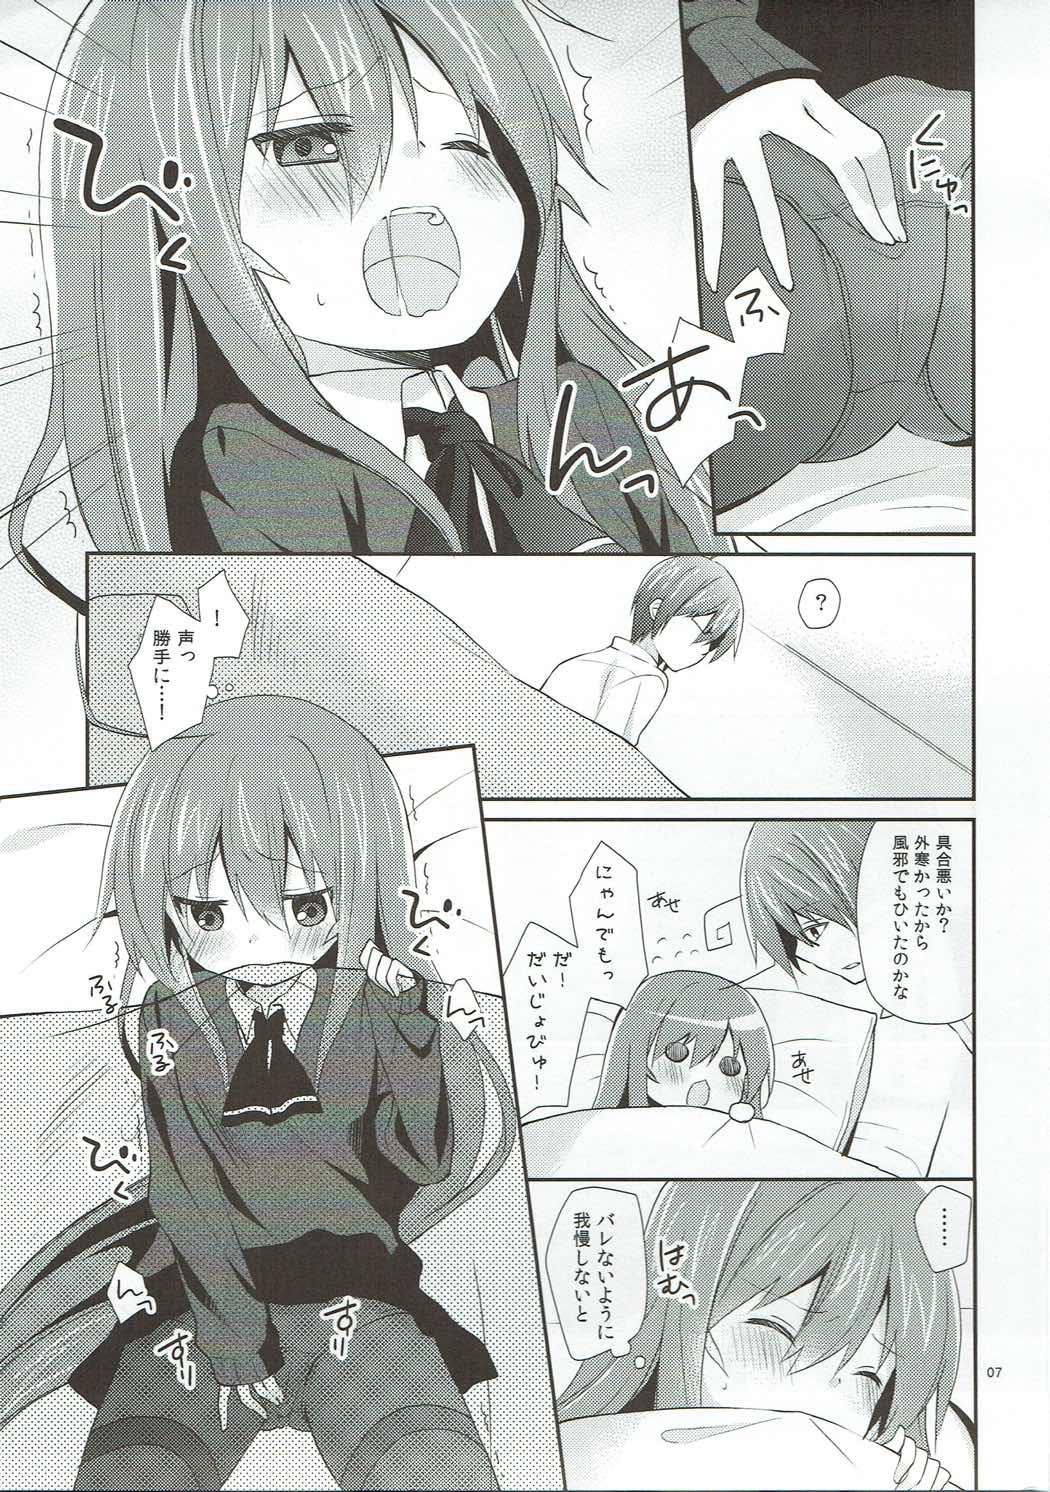 College Melt Like Chocolate - Acchi kocchi Roughsex - Page 6